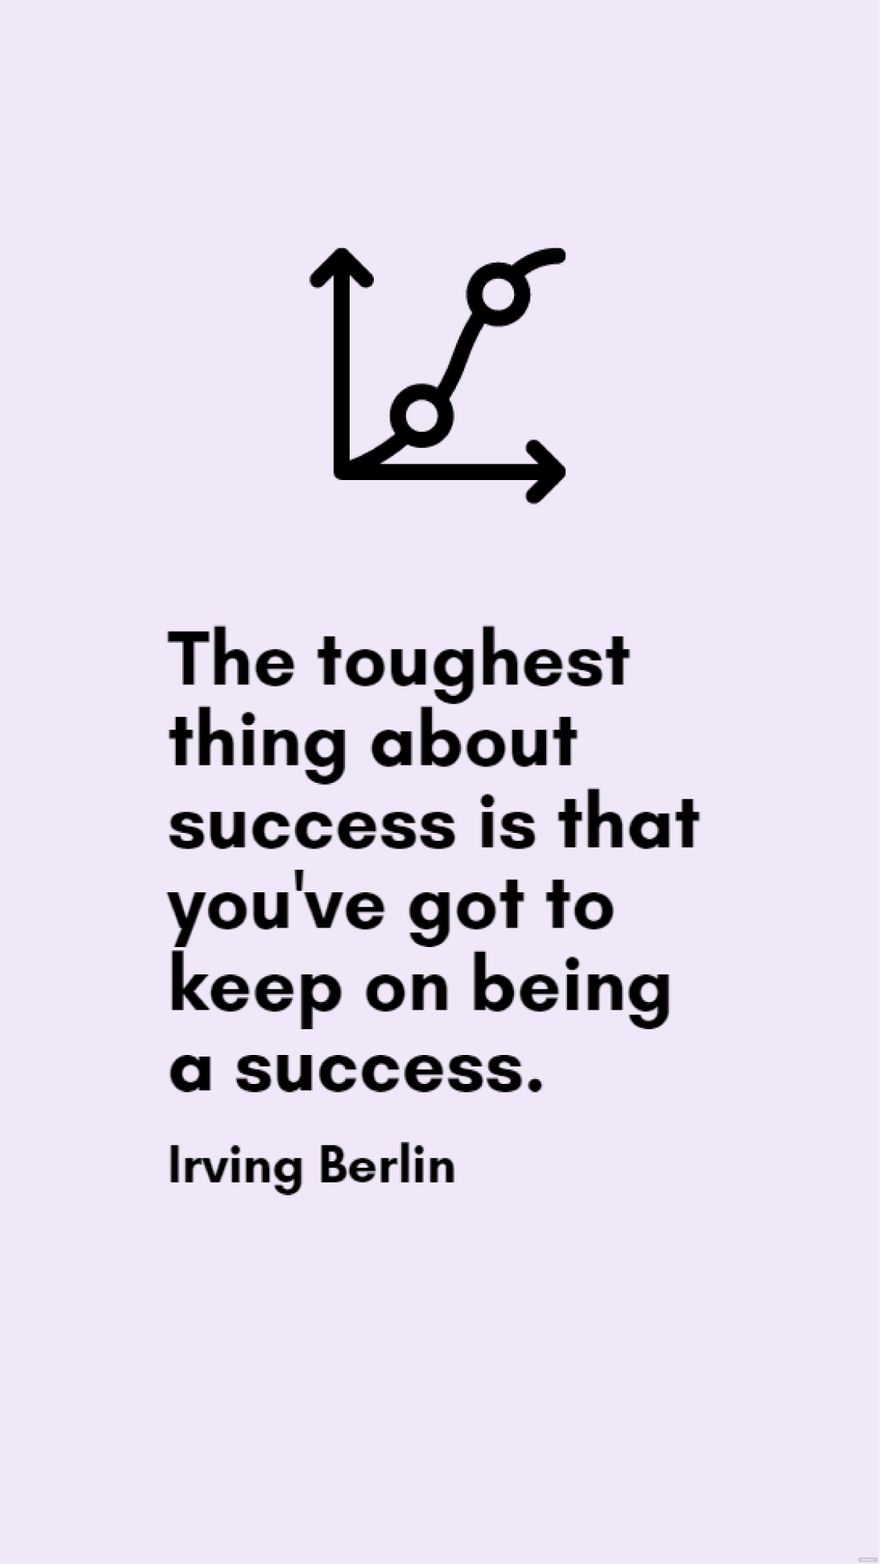 Free Irving Berlin - The toughest thing about success is that you've got to keep on being a success.